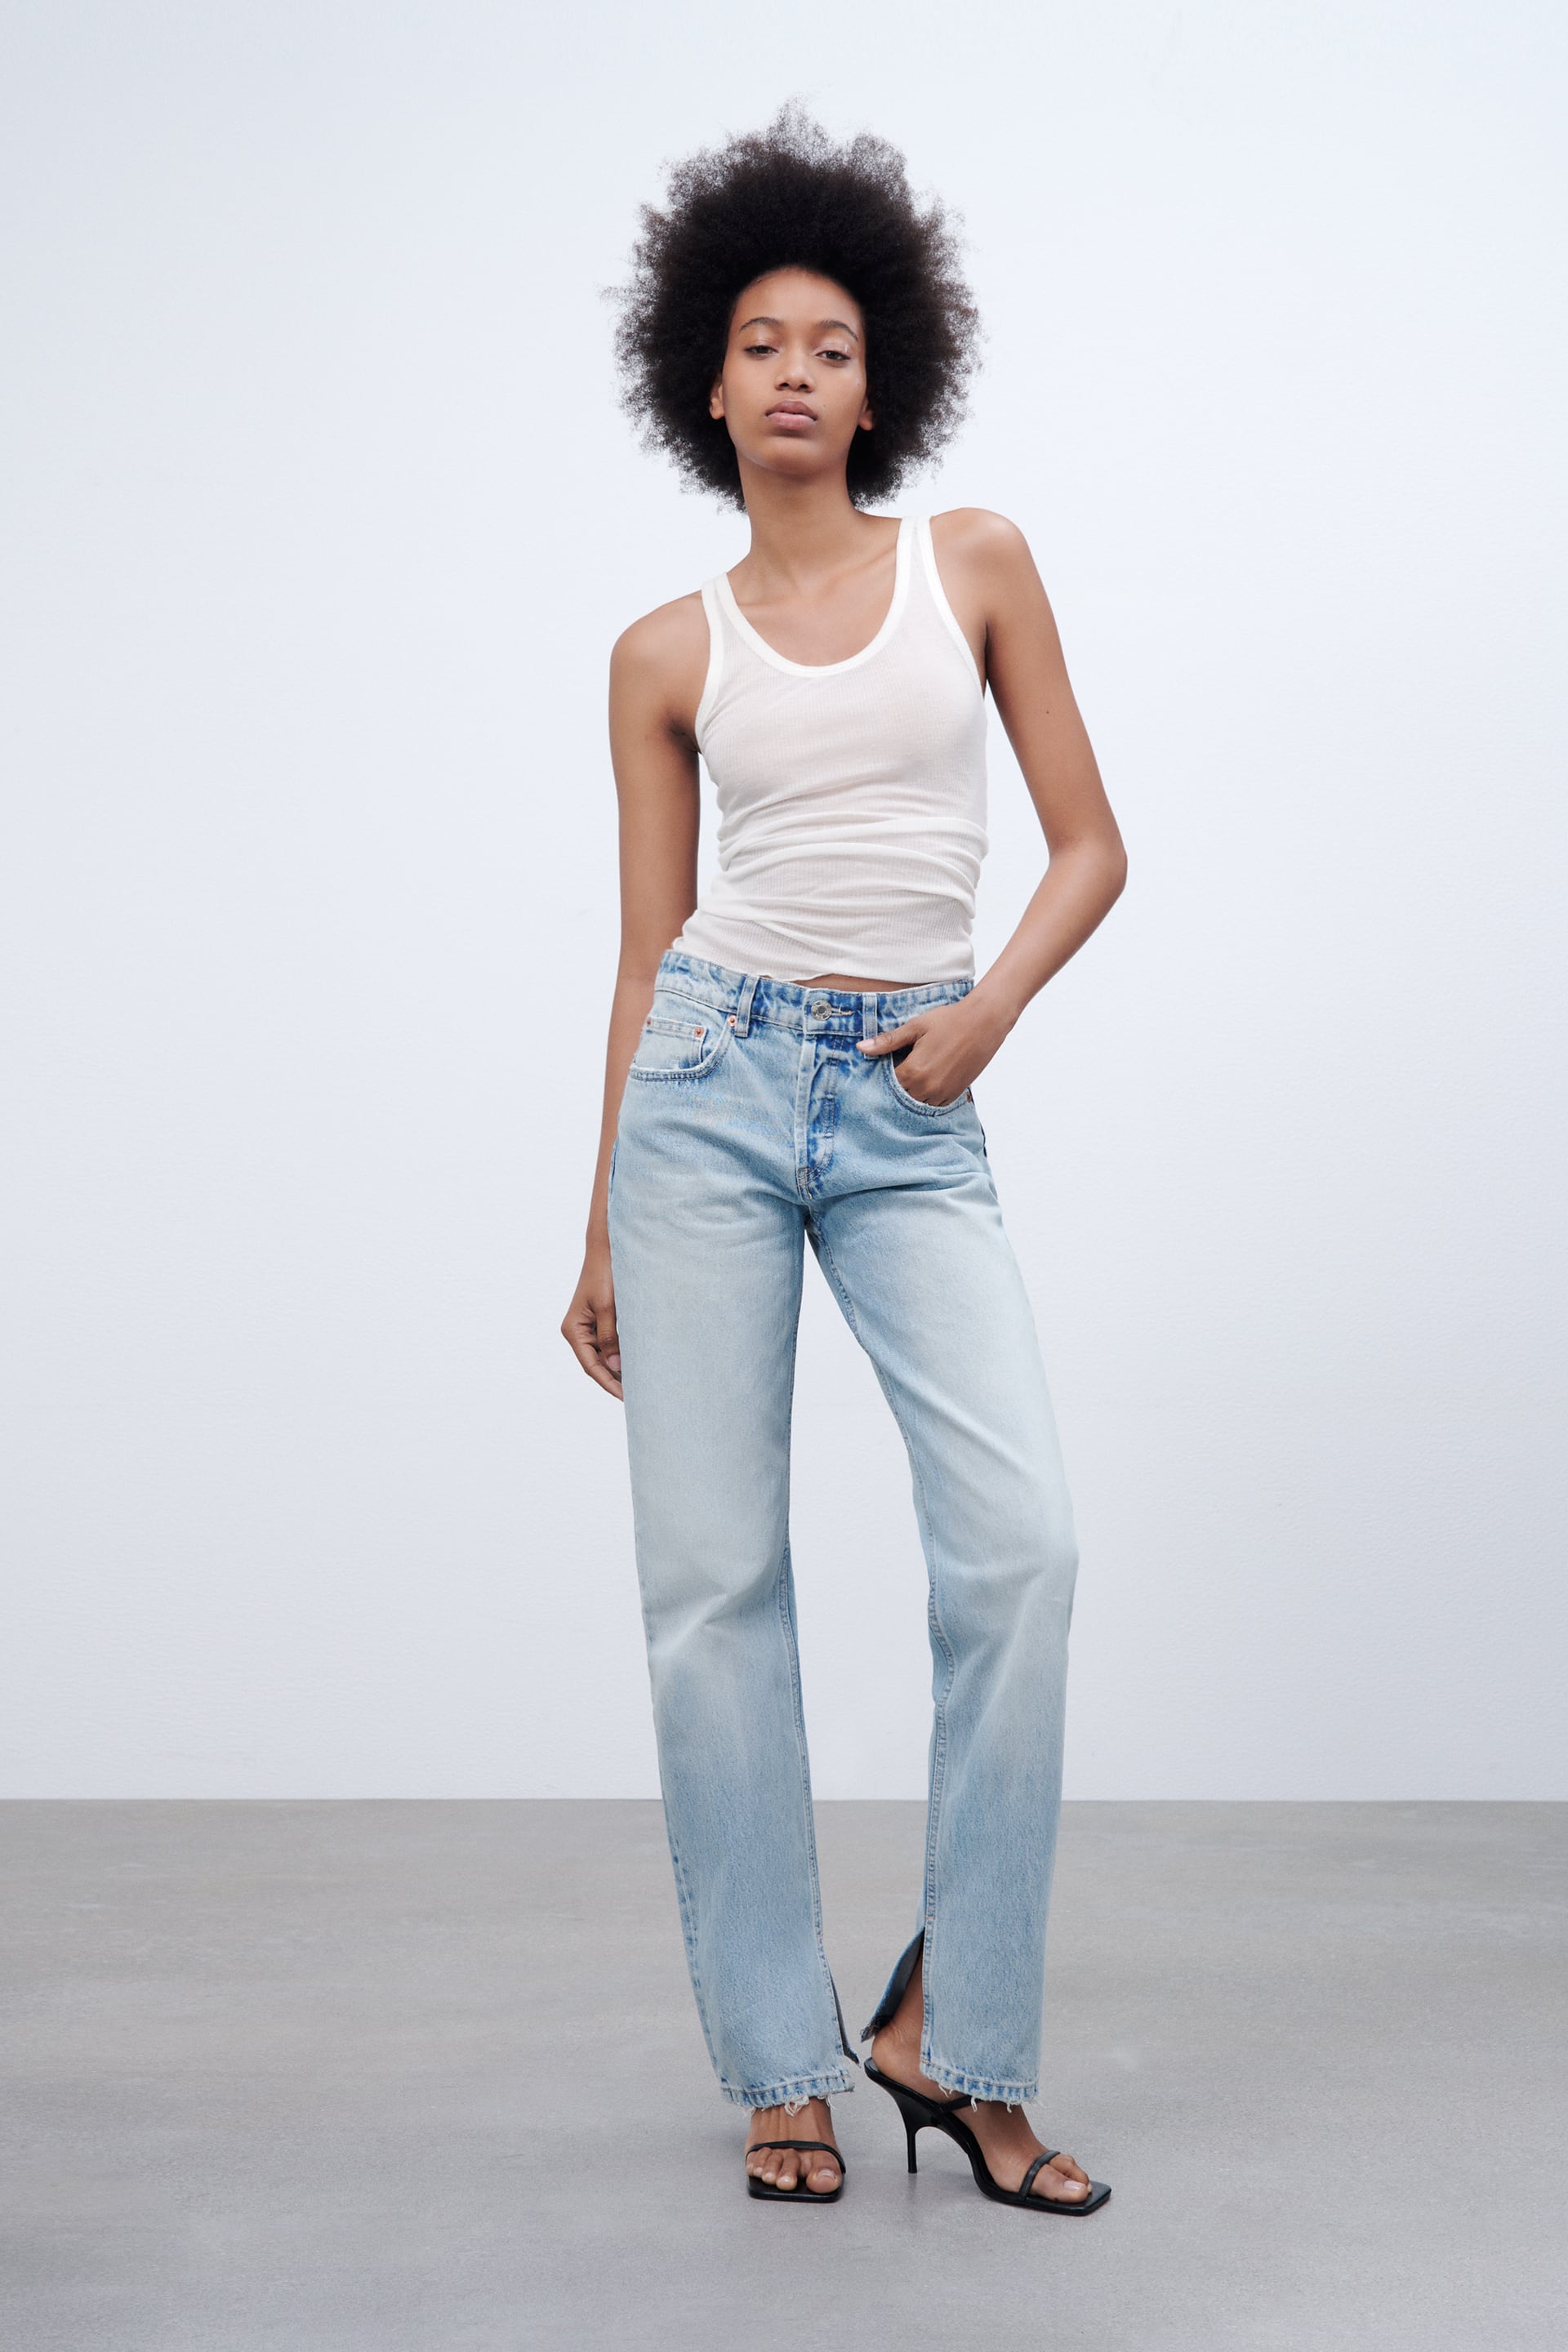 Inaccessible Cilia fry TRF STRAIGHT JEANS - Light blue | ZARA United States